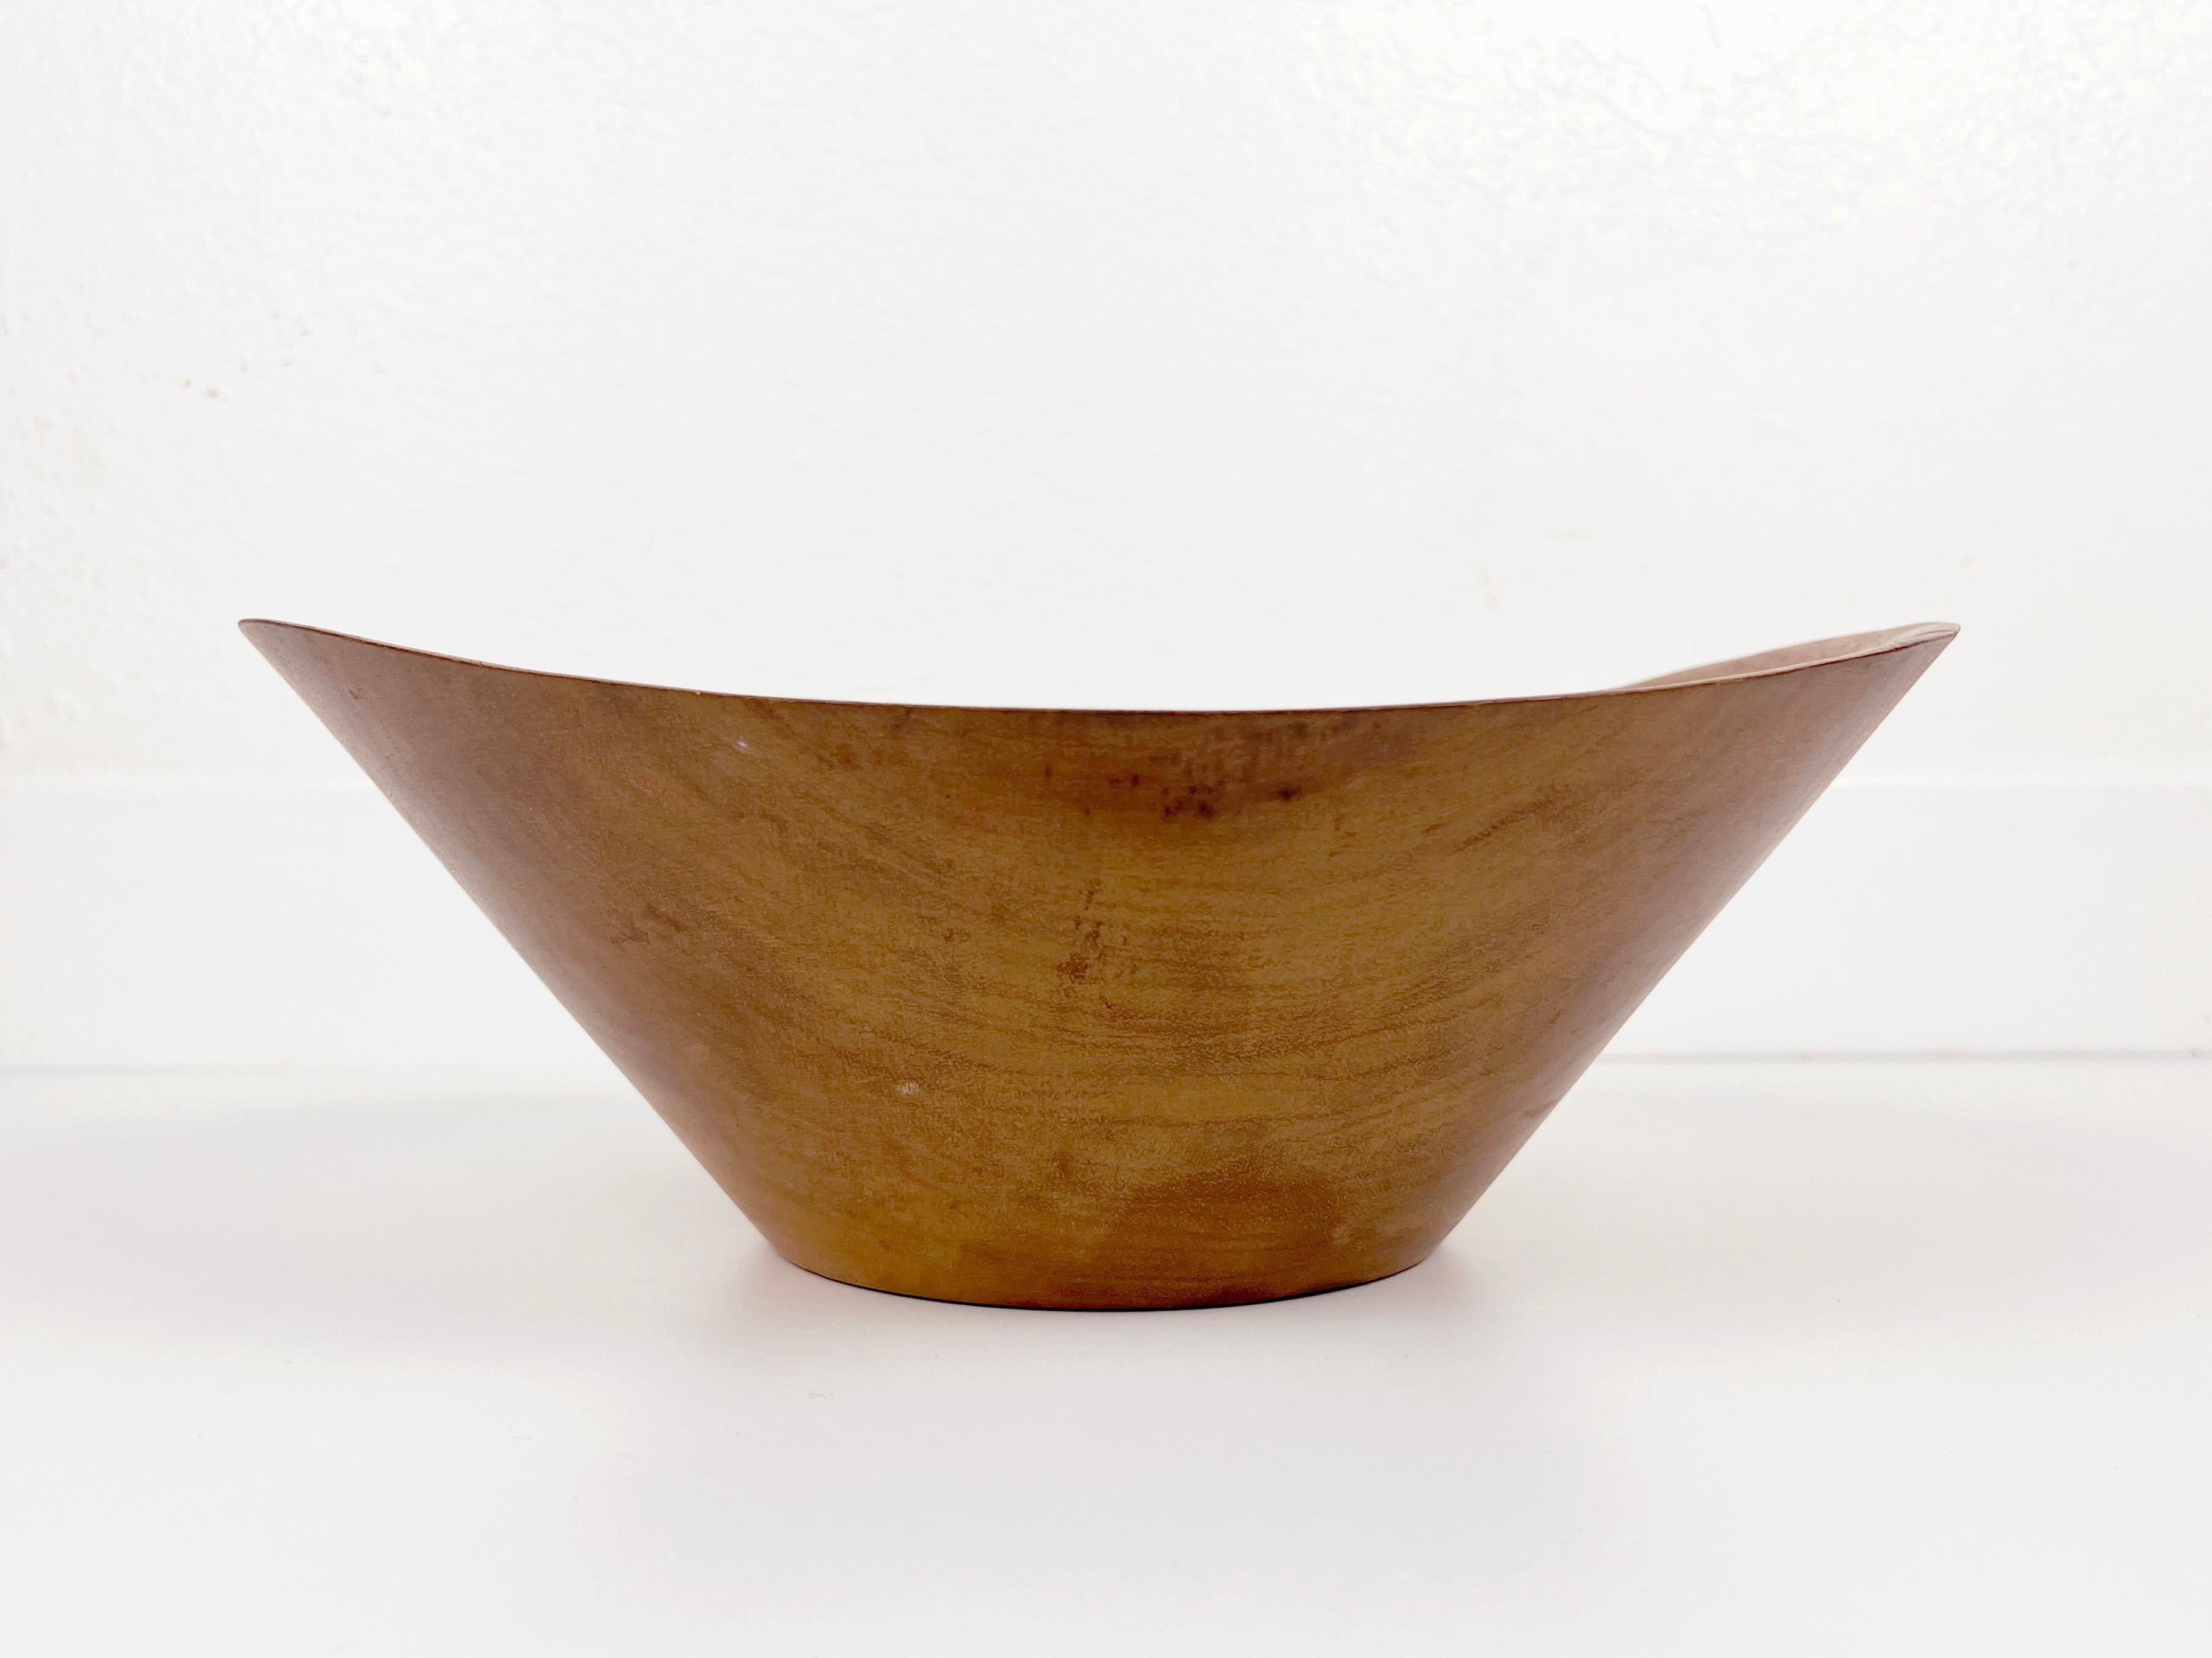 Vintage large free form Taverneau wood bowl made in Haiti by Arthur Umanoff for Pantalcraft.

Designer: Arthur Umanoff

Maker: Pantalcraft

Origin: Haiti

Year: 1960s

Style: Mid Century Modern

Dimensions: 13.75 wide x 12.25